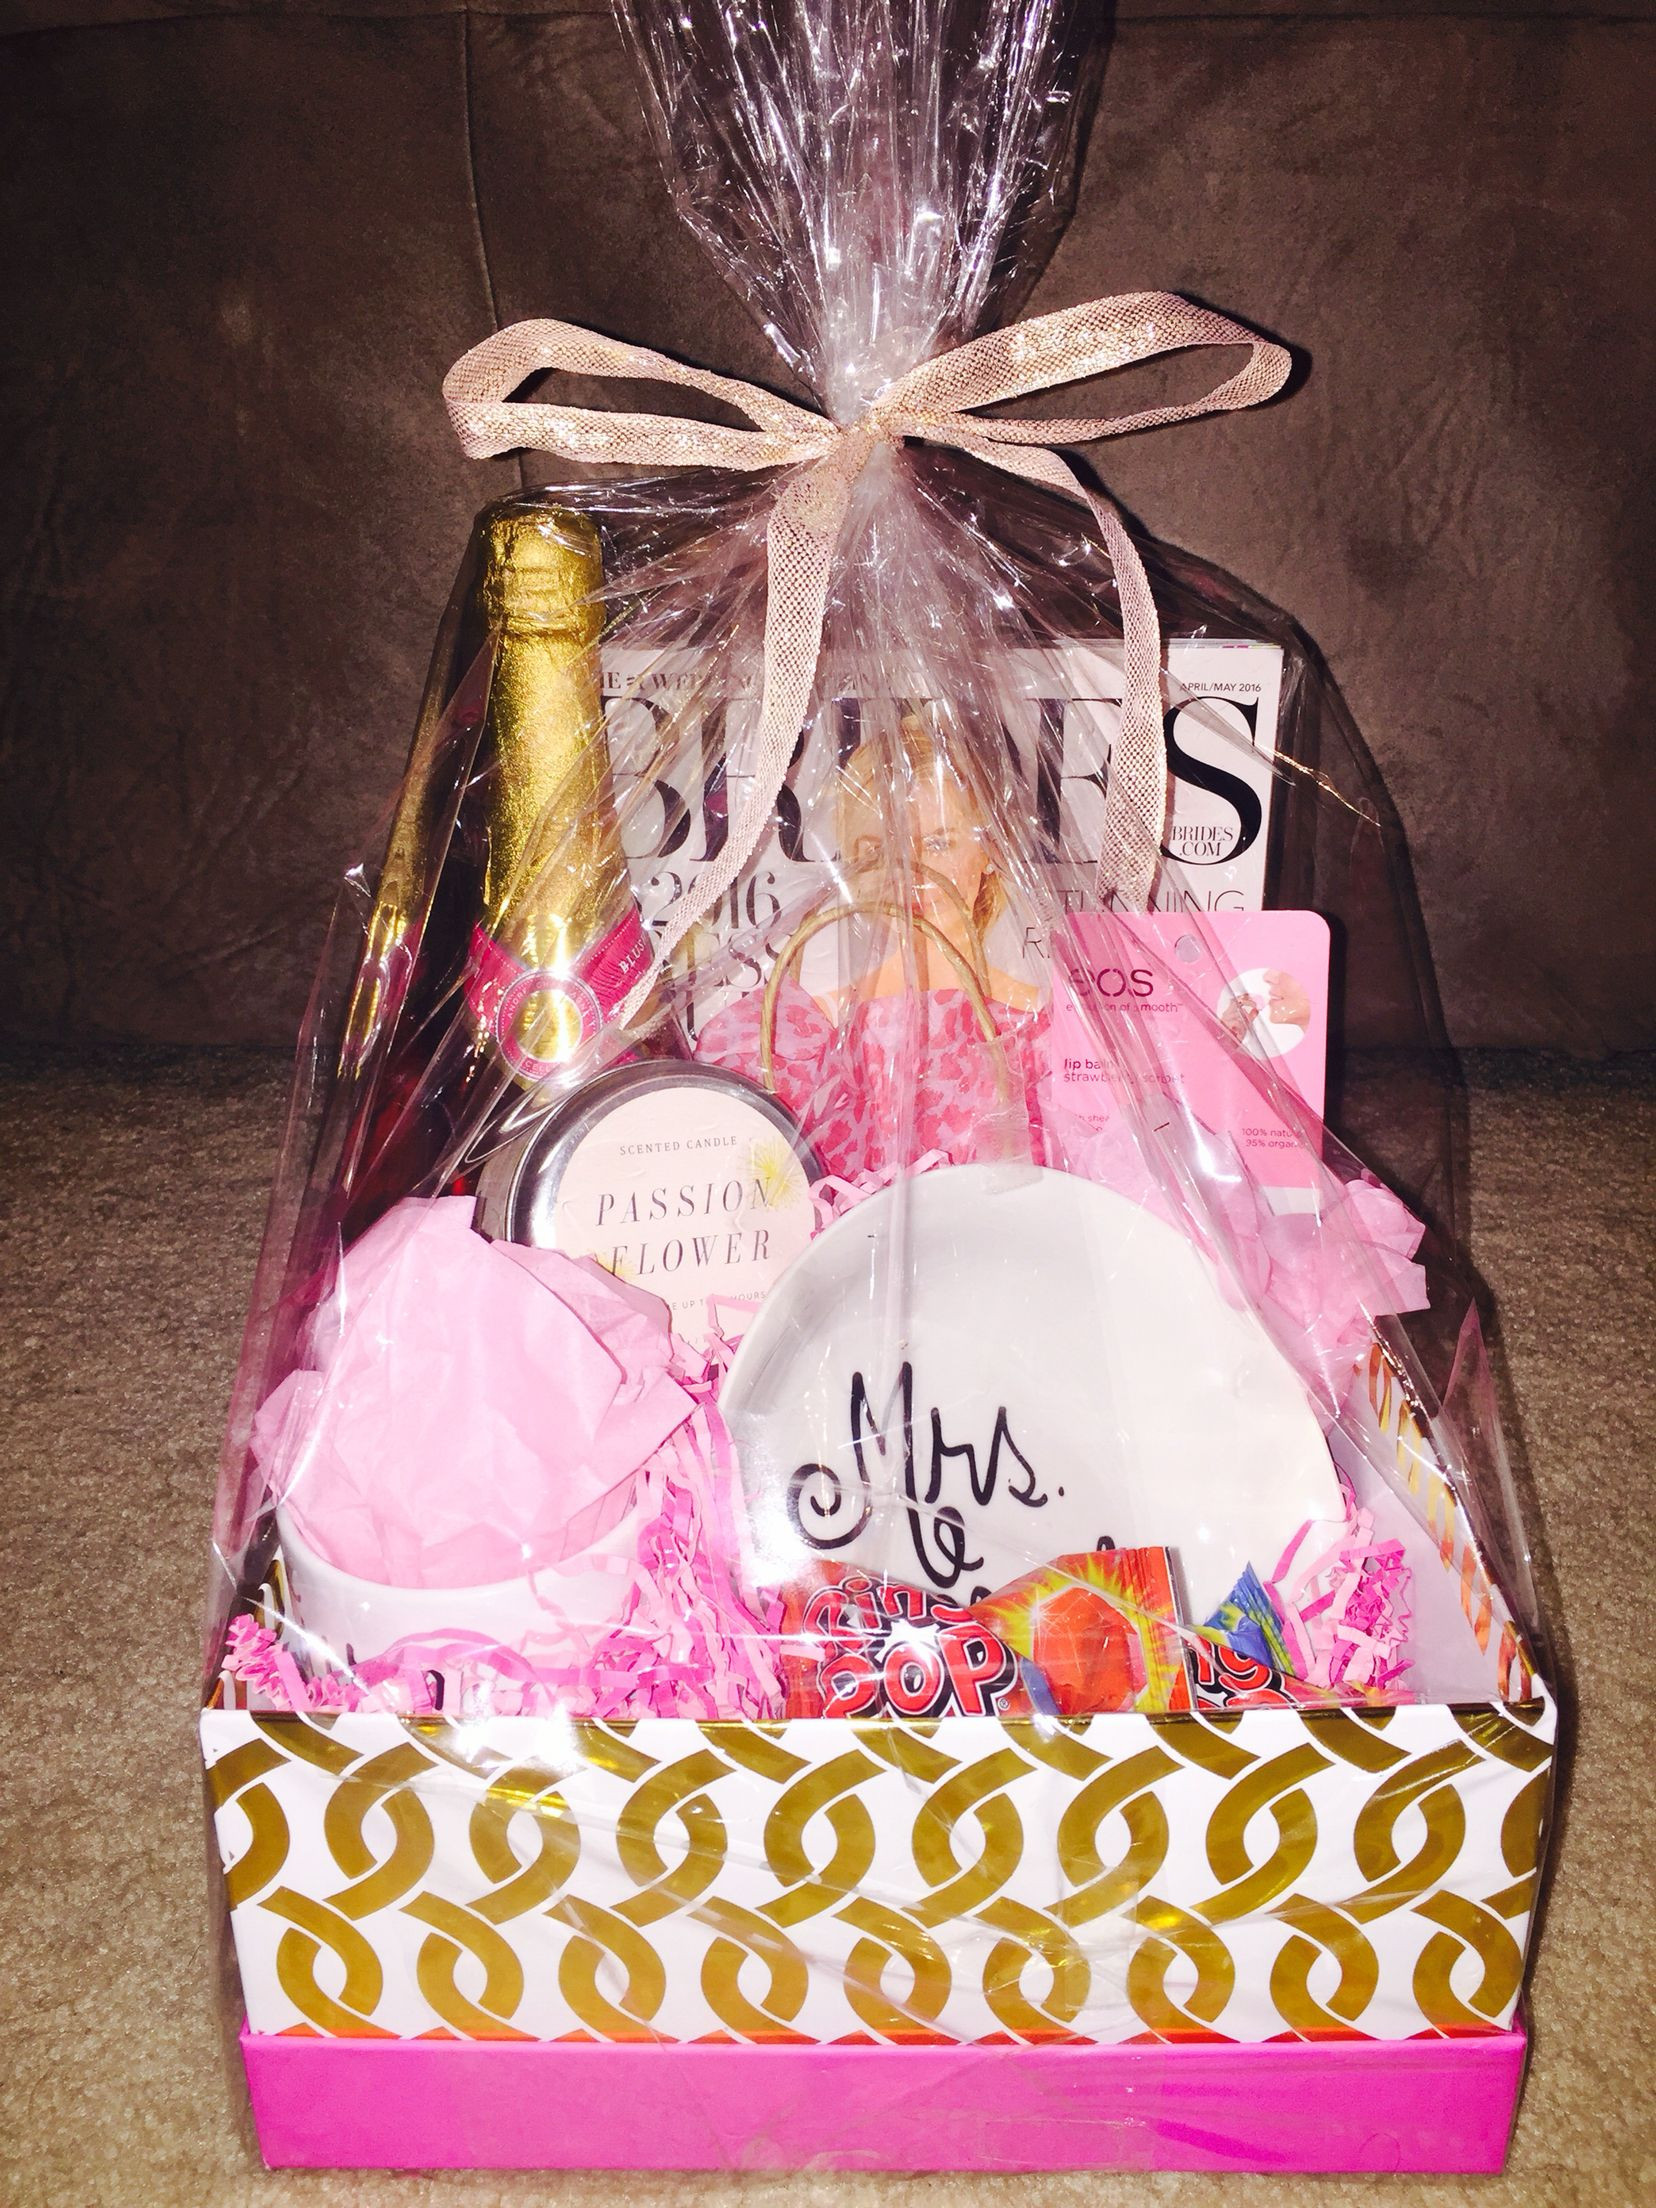 Wedding Gift Ideas For Best Friend Bride
 Engagement t basket I made for my newly engaged best